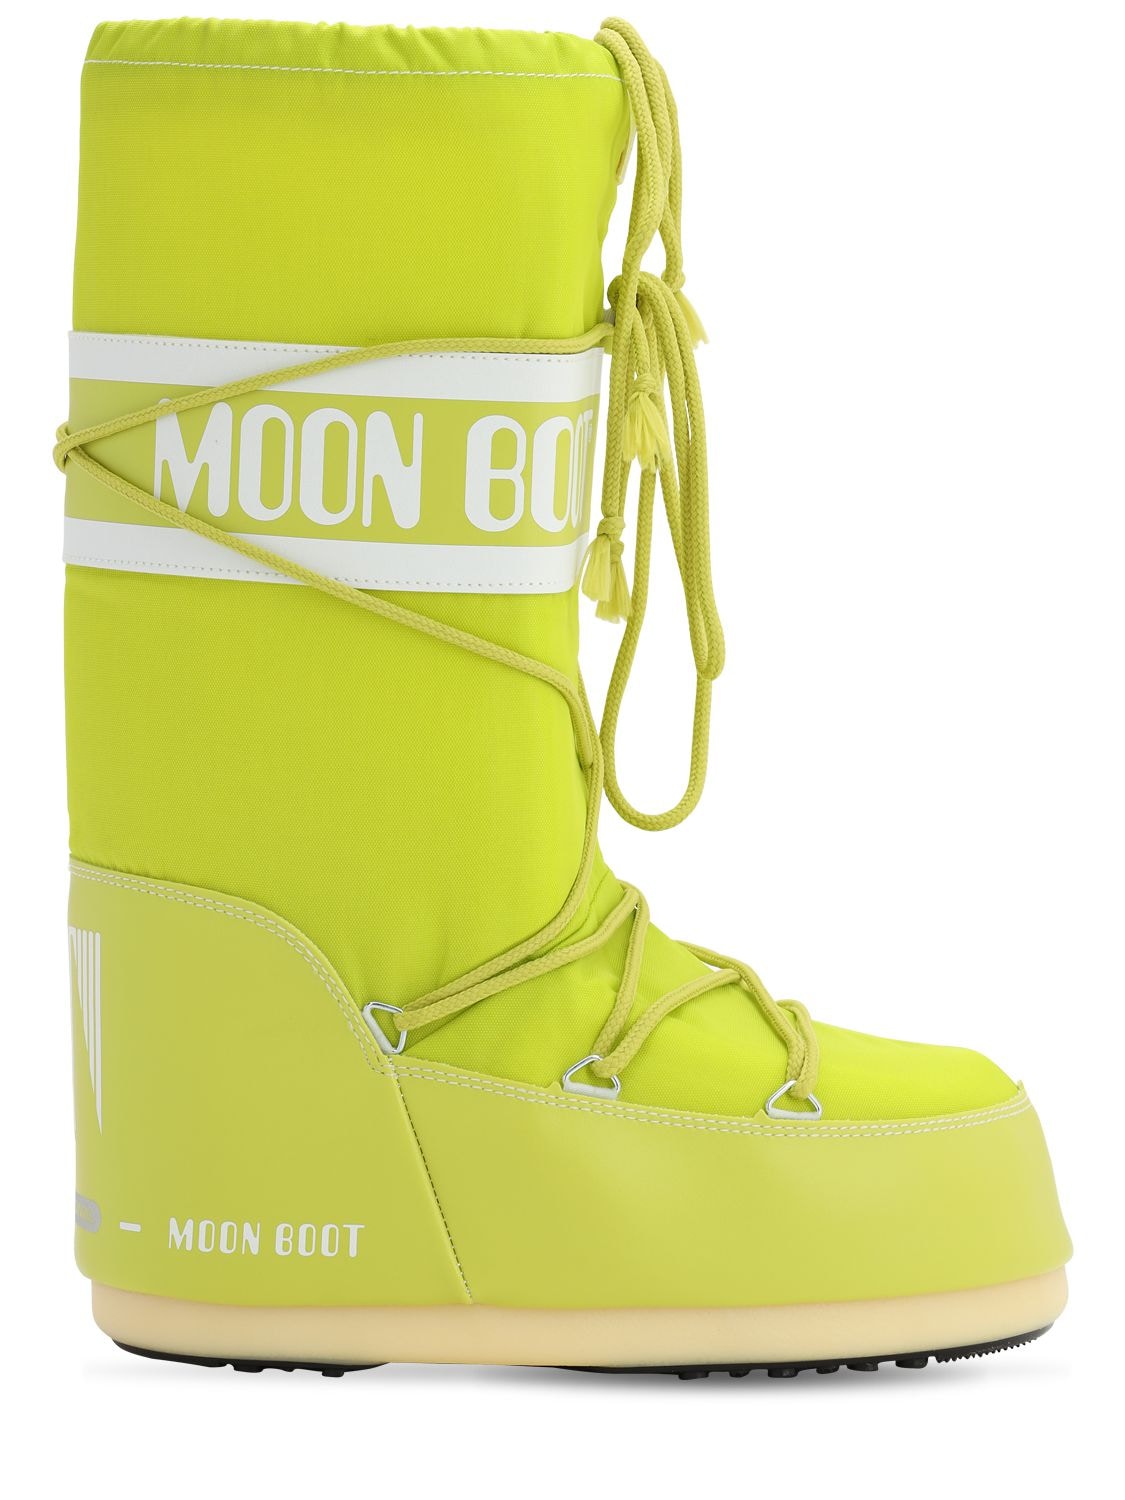 Moon Boot Classic Nylon Waterproof Snow Boots In Lime Green